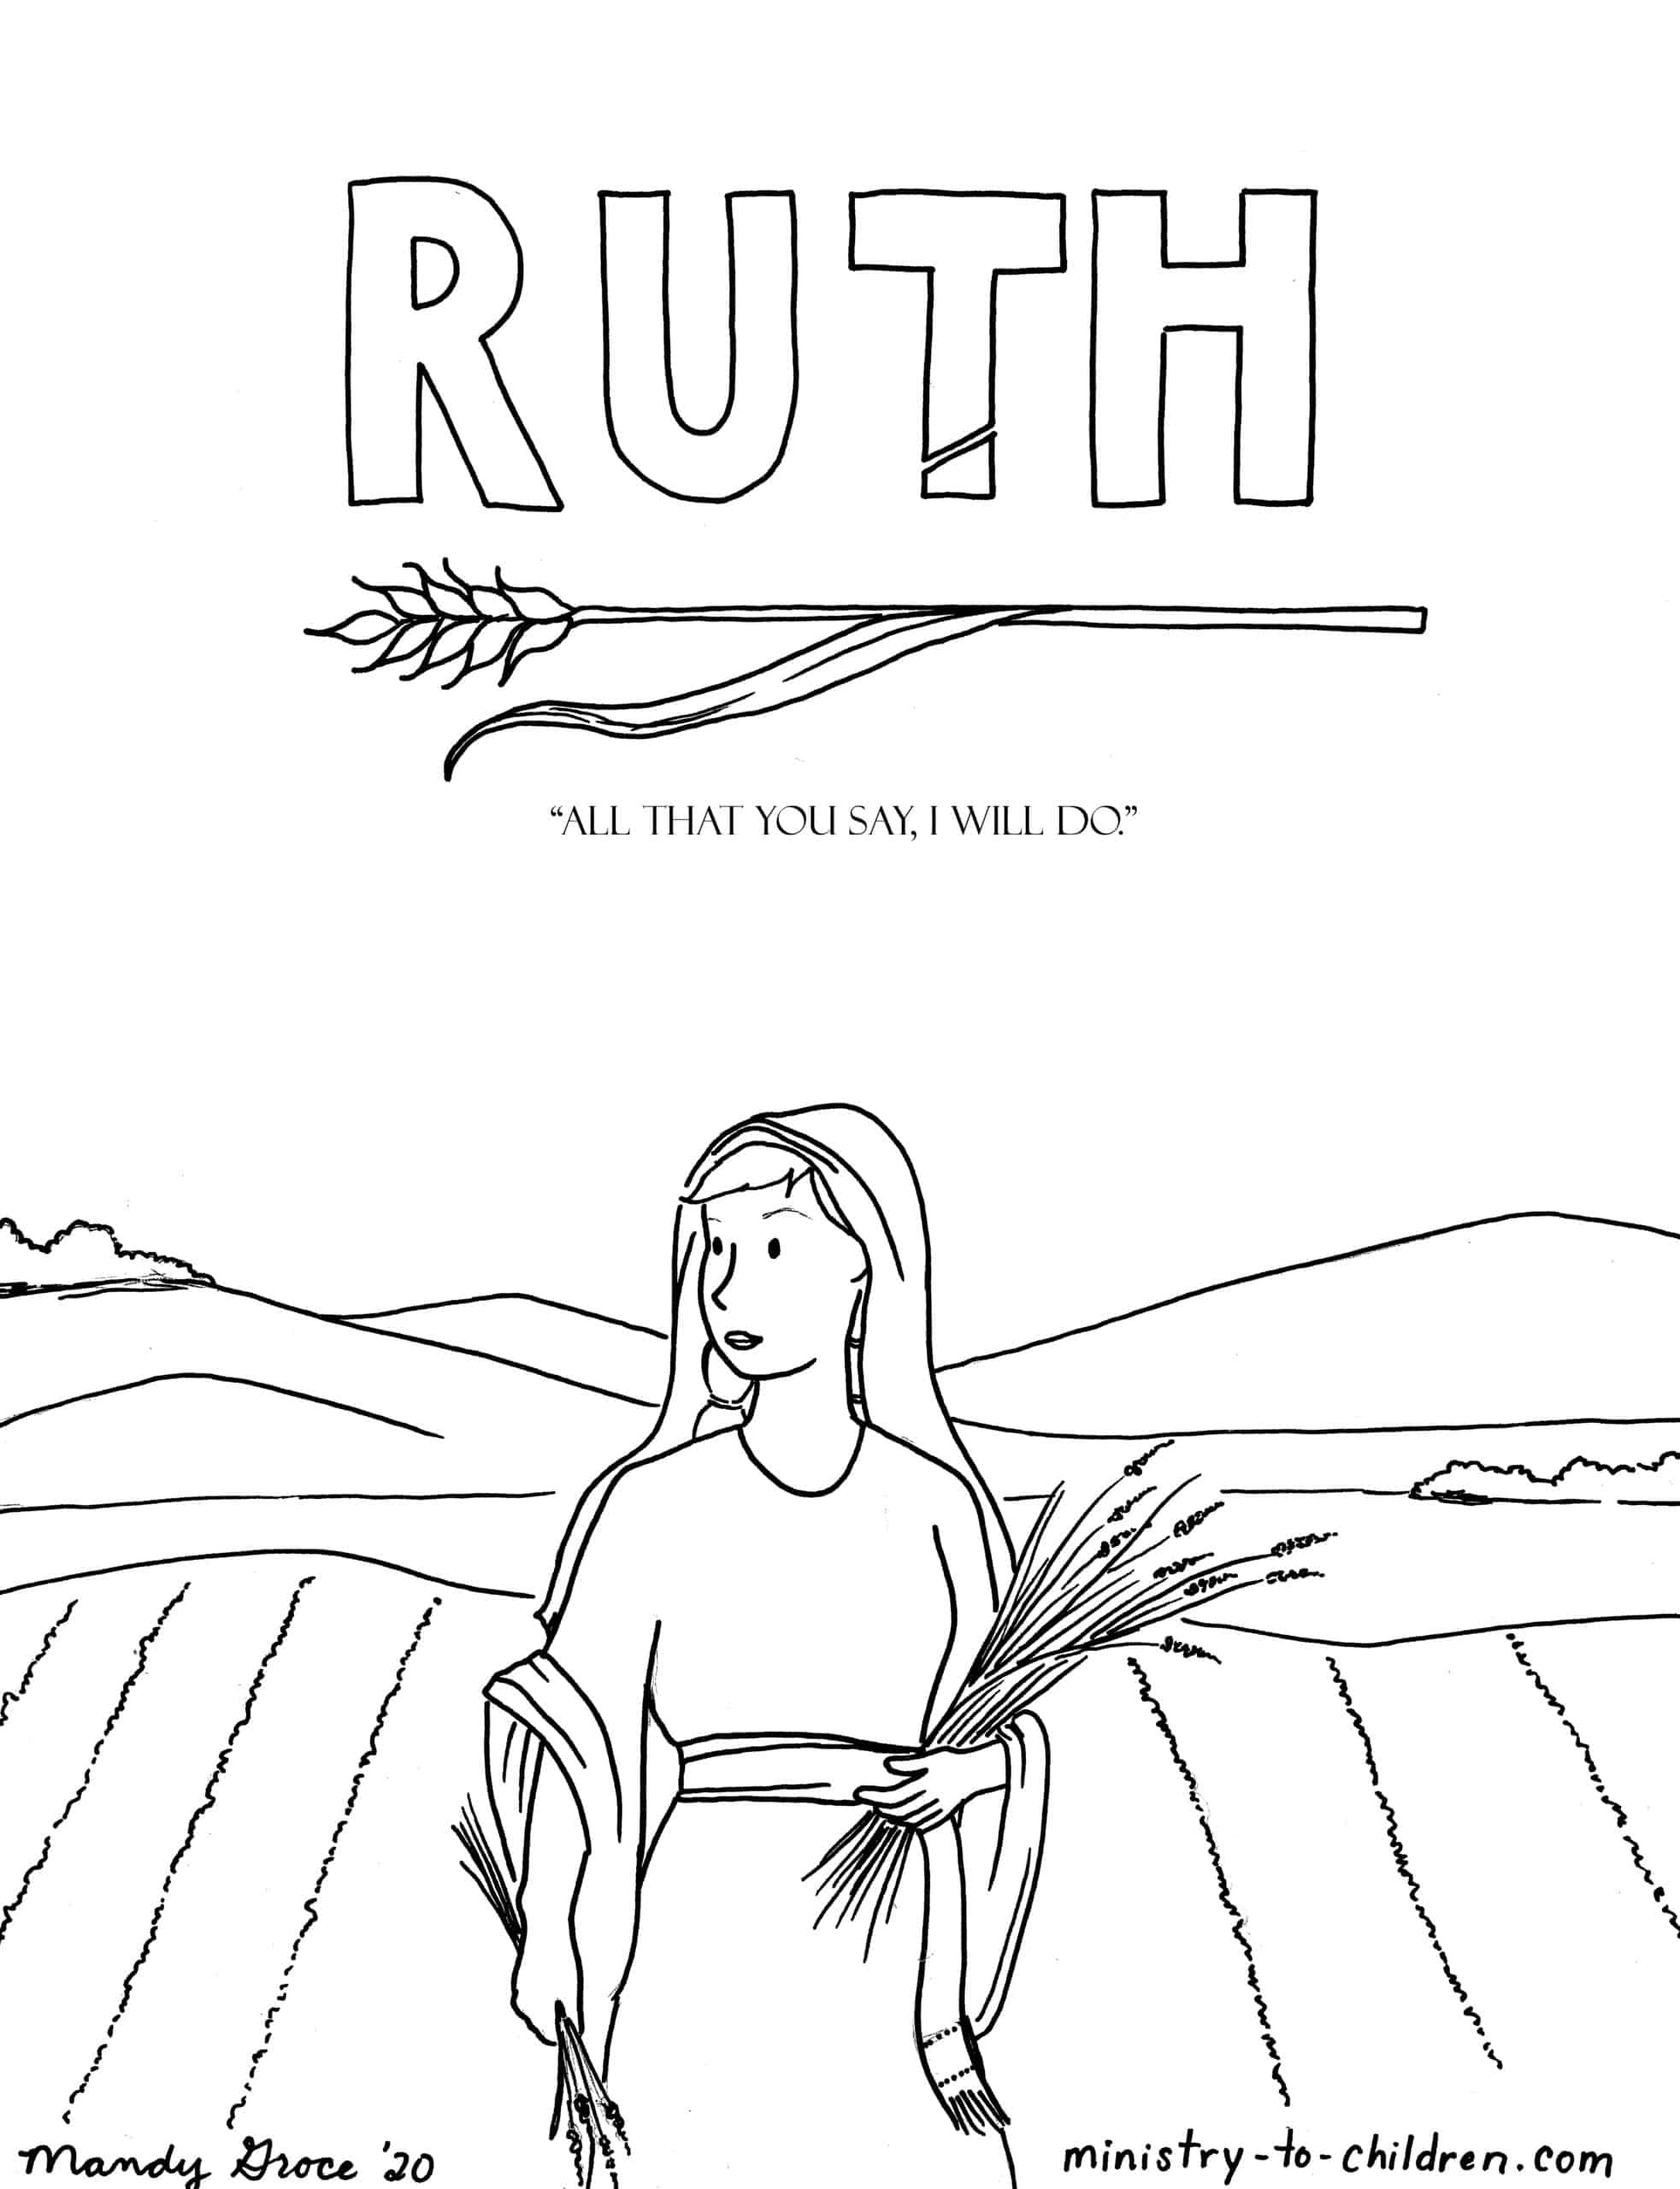 Download Ruth Coloring Page | Ministry-To-Children